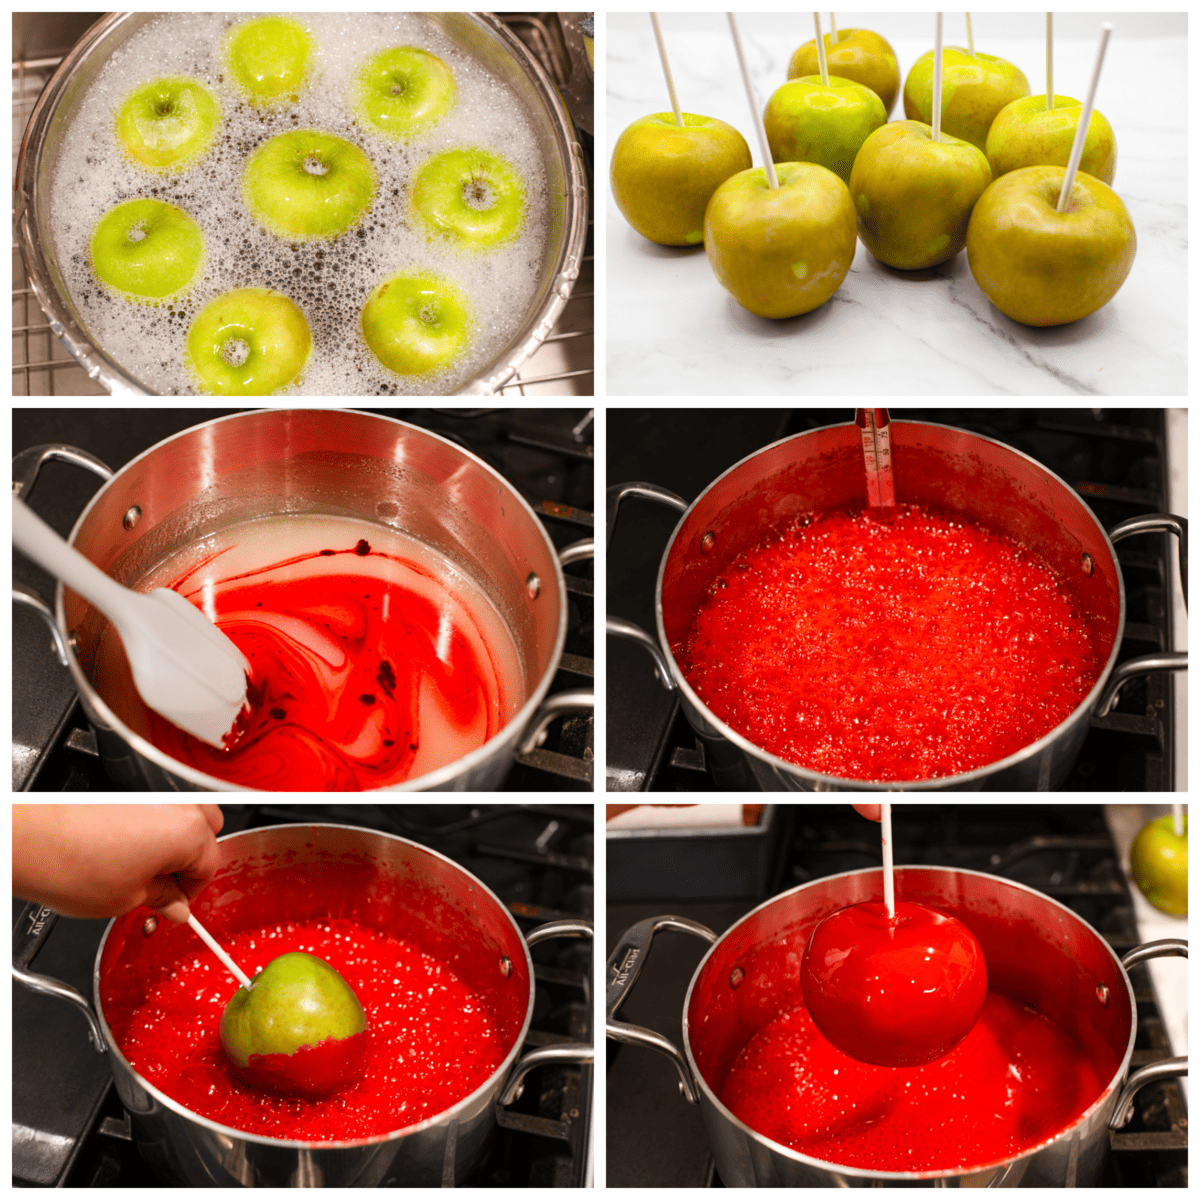 6-photo collage of apples being washed and prepped, then dipped in the candy coating.